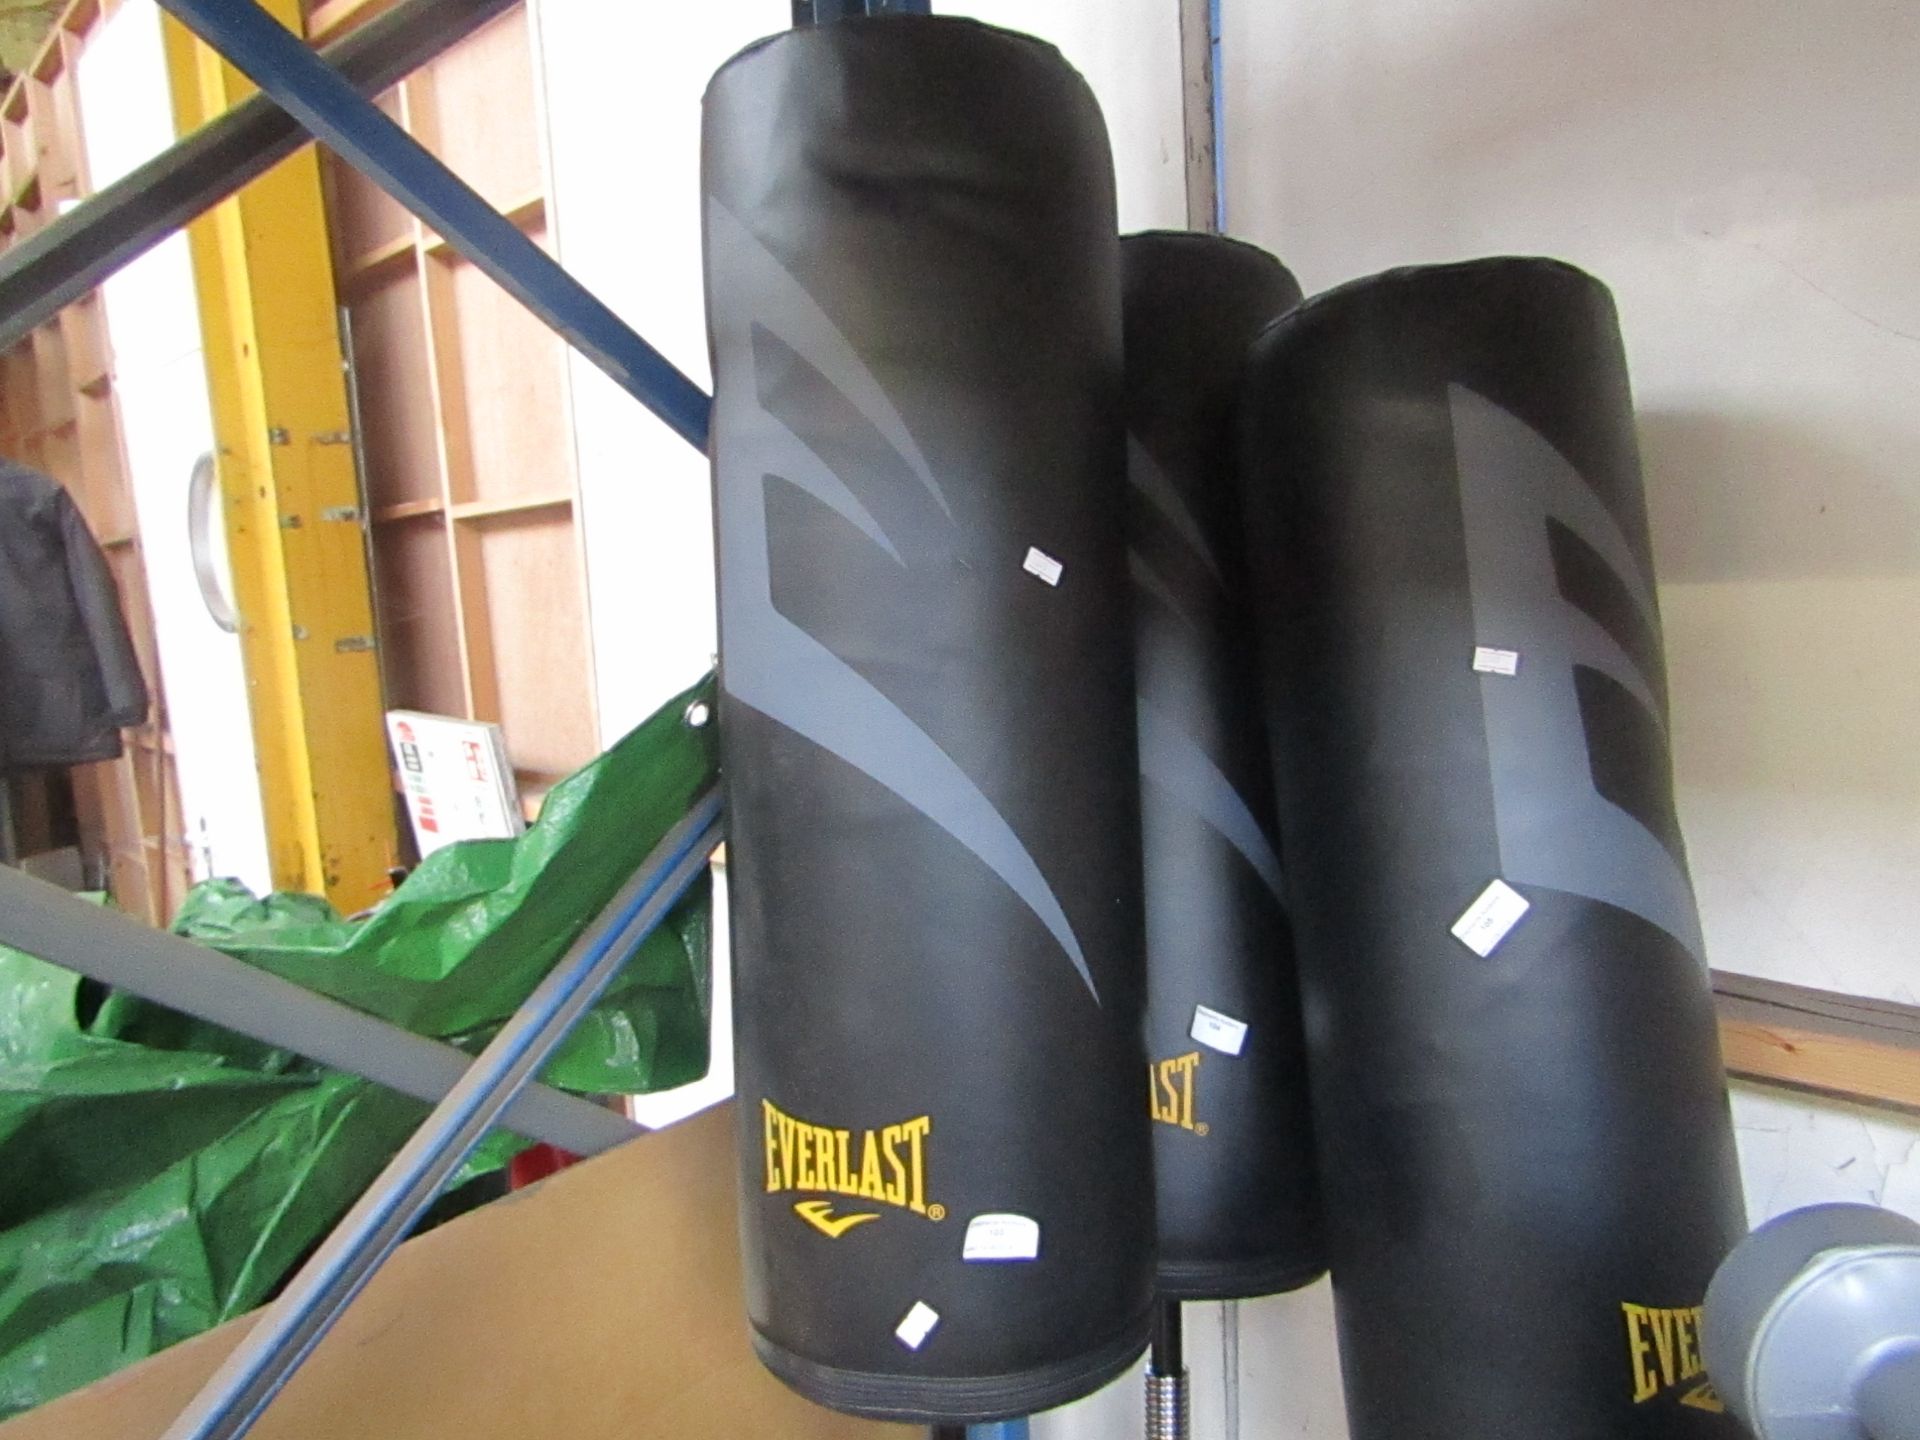 Everlast freestanding punch bag, needs repairing as it has snapped off the base.